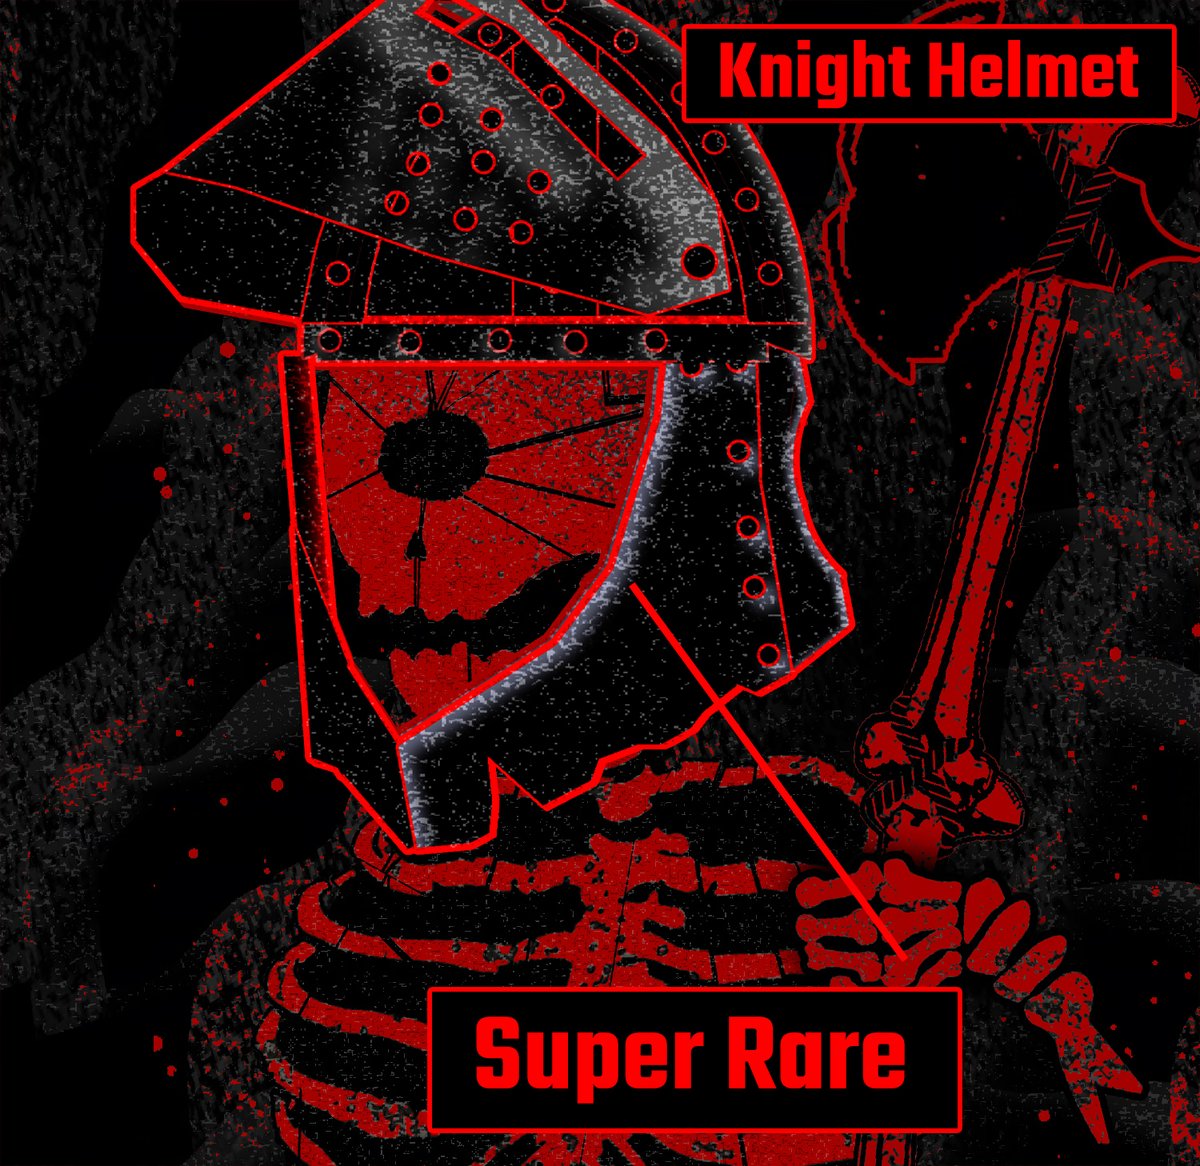 🗡️KNIGHT HELMET🗡️

This SUPER RARE helmet has been minted only once. 
There are still a few 'locked' pieces from the CBRS collection 🔥

Get yours for 0.06 SOL 
Link below